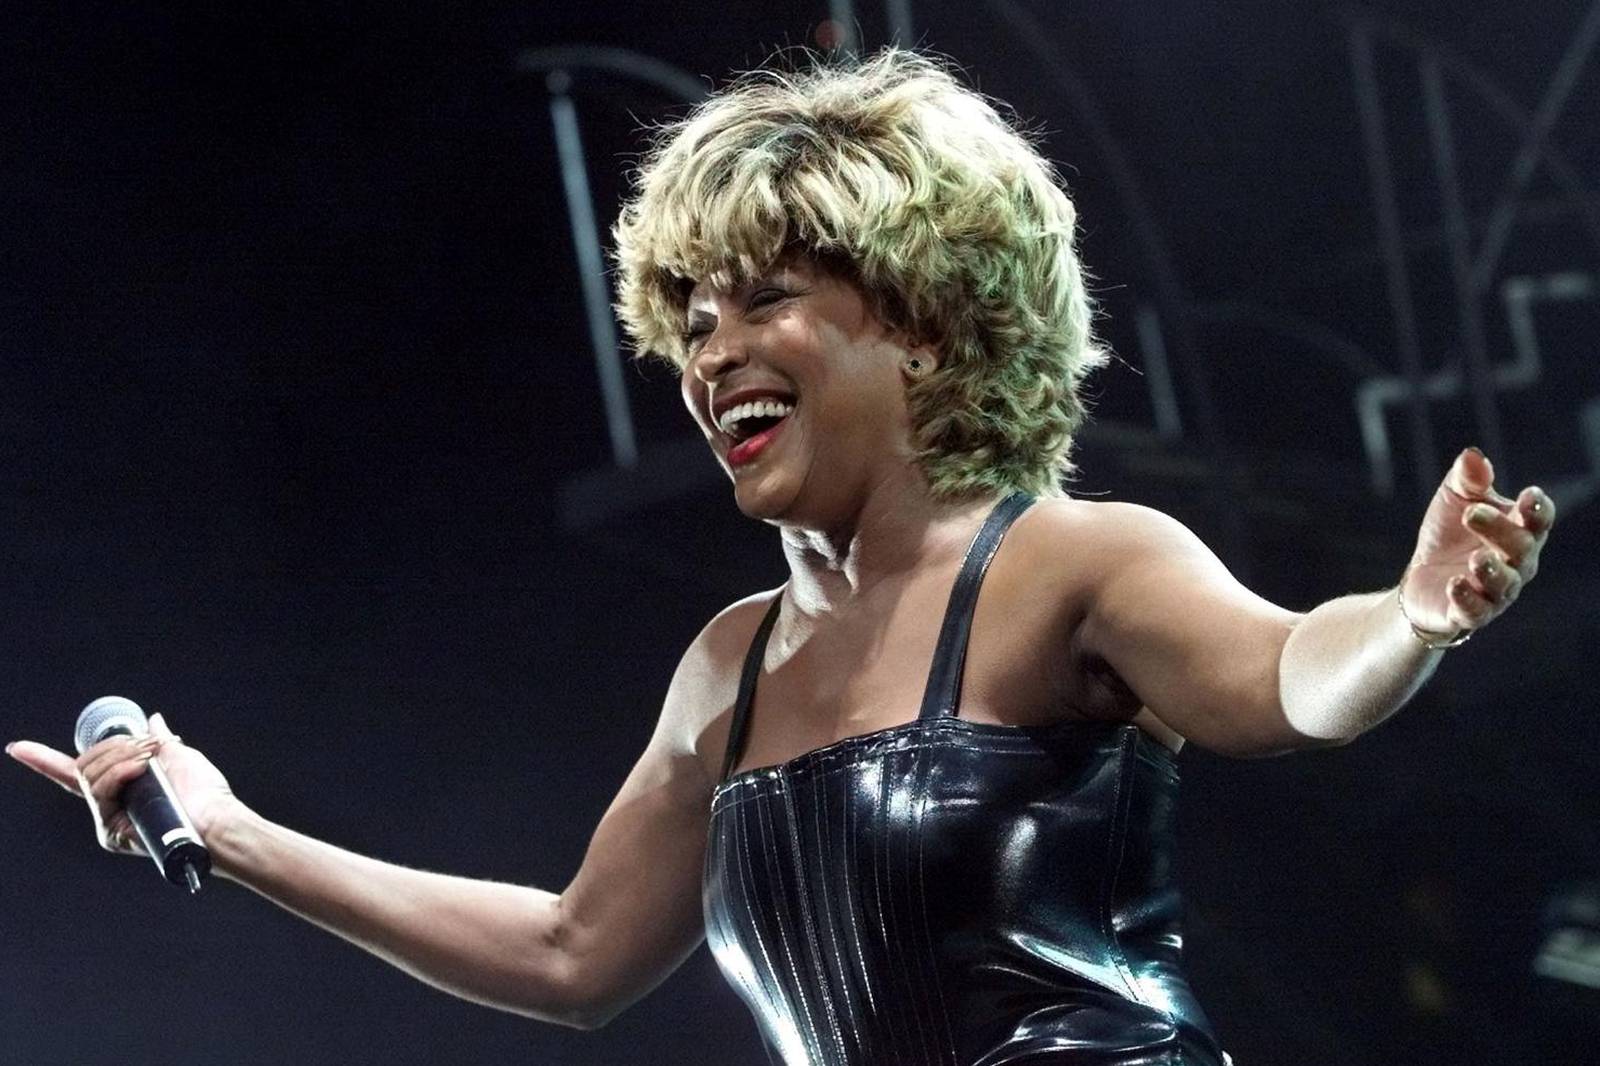 FILE PHOTO: Singer Tina Turner acknowledges applause after performing on the closing night of her "Twenty Four Seven" concert tour, at the Arrowhead Pond arena in Anaheim, California